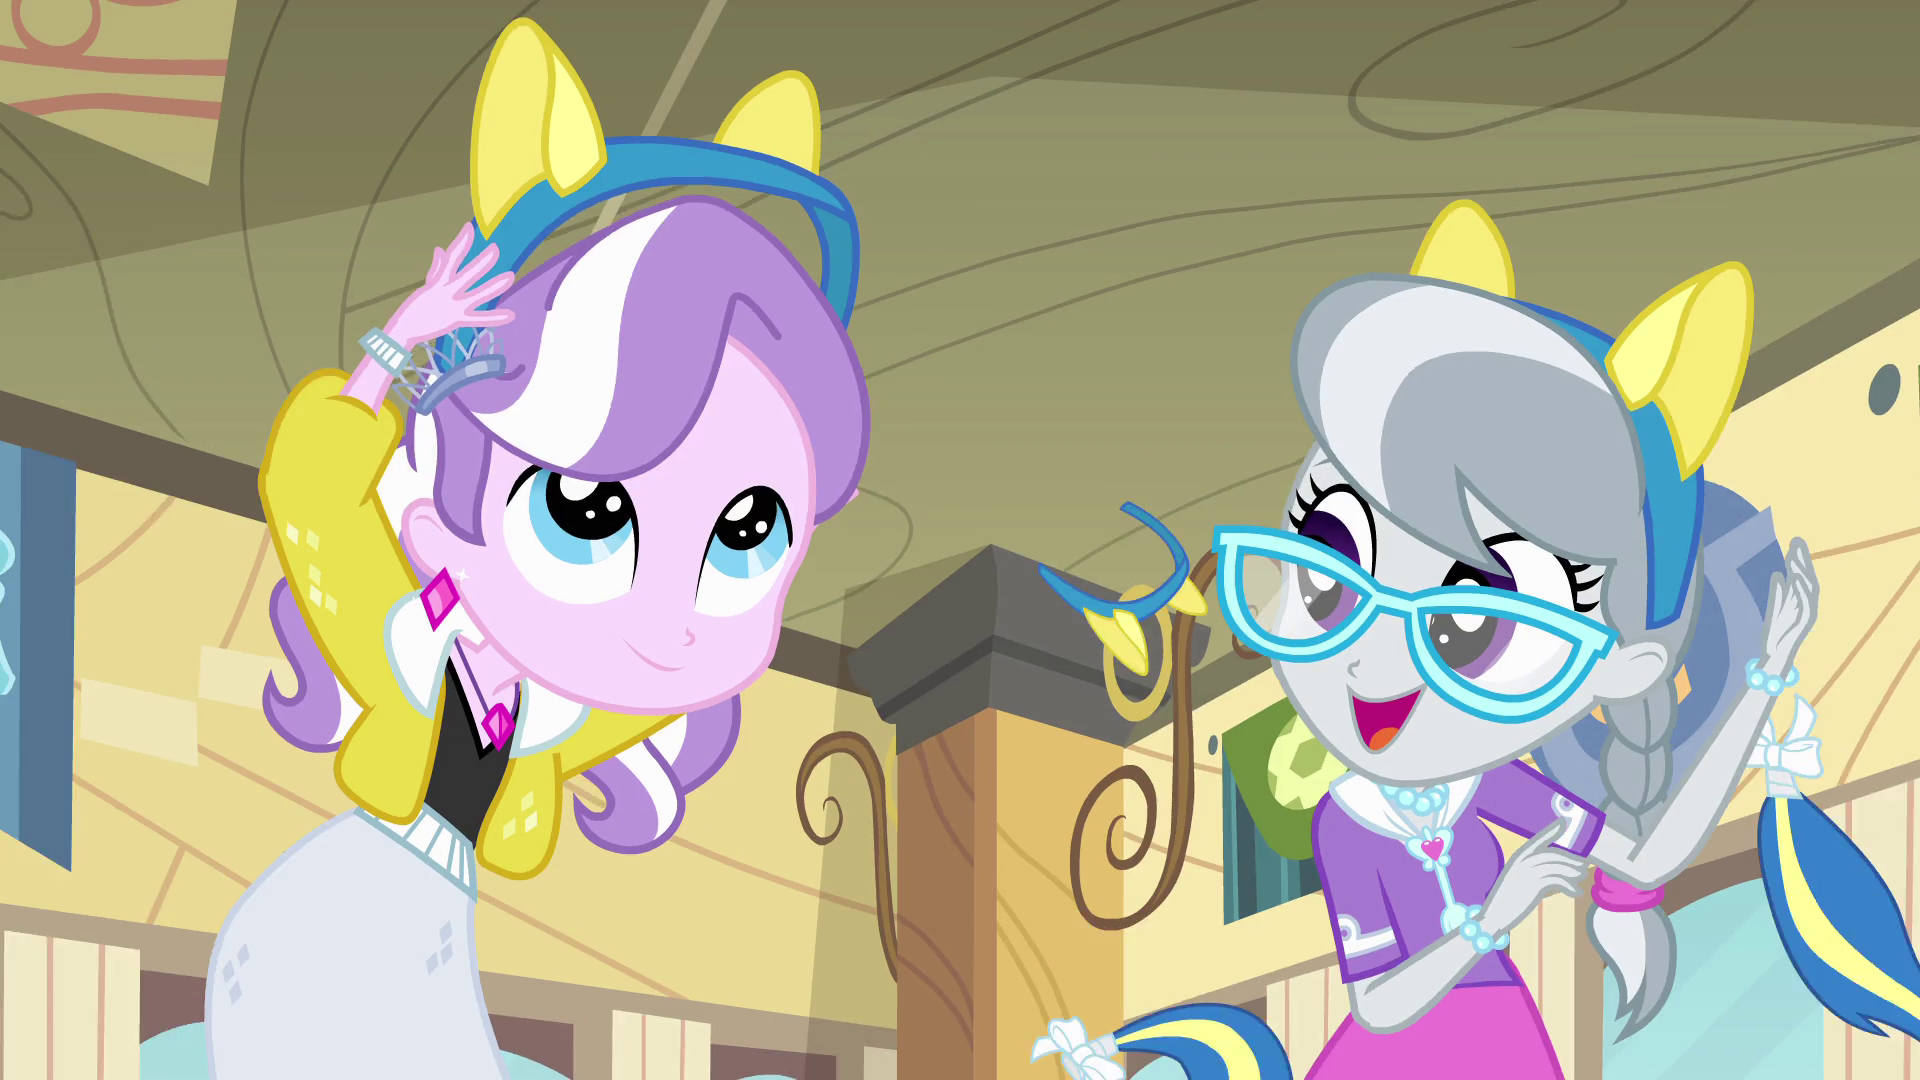 Diamond_Tiara_and_Silver_Spoon_in_cafete